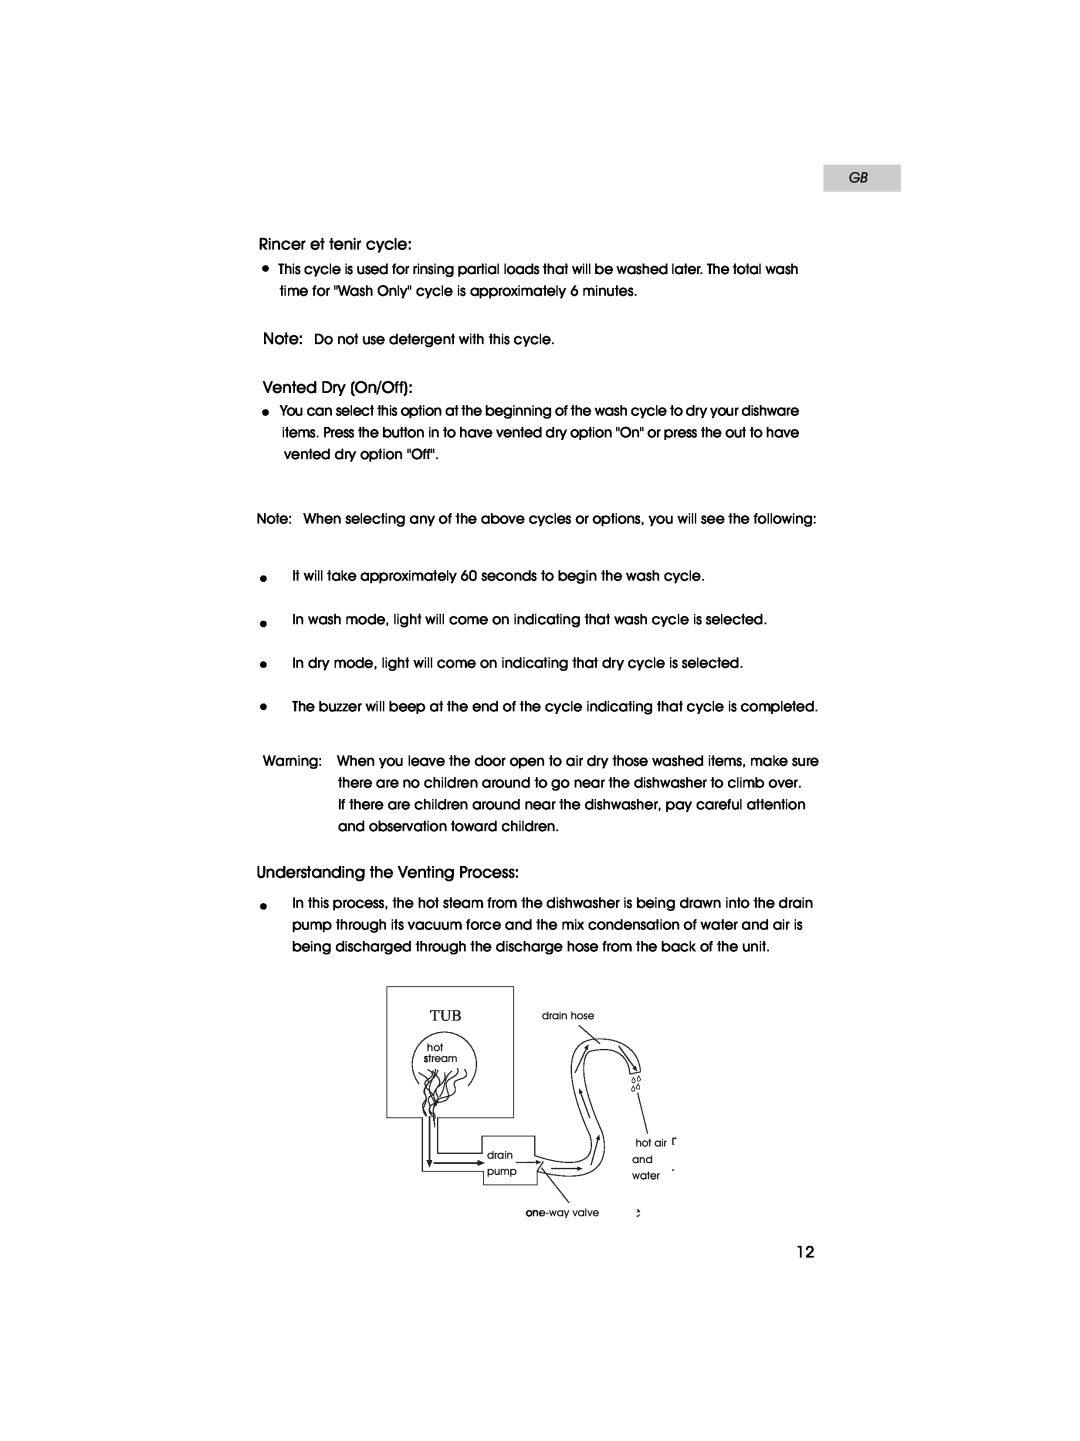 Haier HDT18PA user manual Rincer et tenir cycle, Vented Dry On/Off, Understanding the Venting Process, hotair, pump, water 